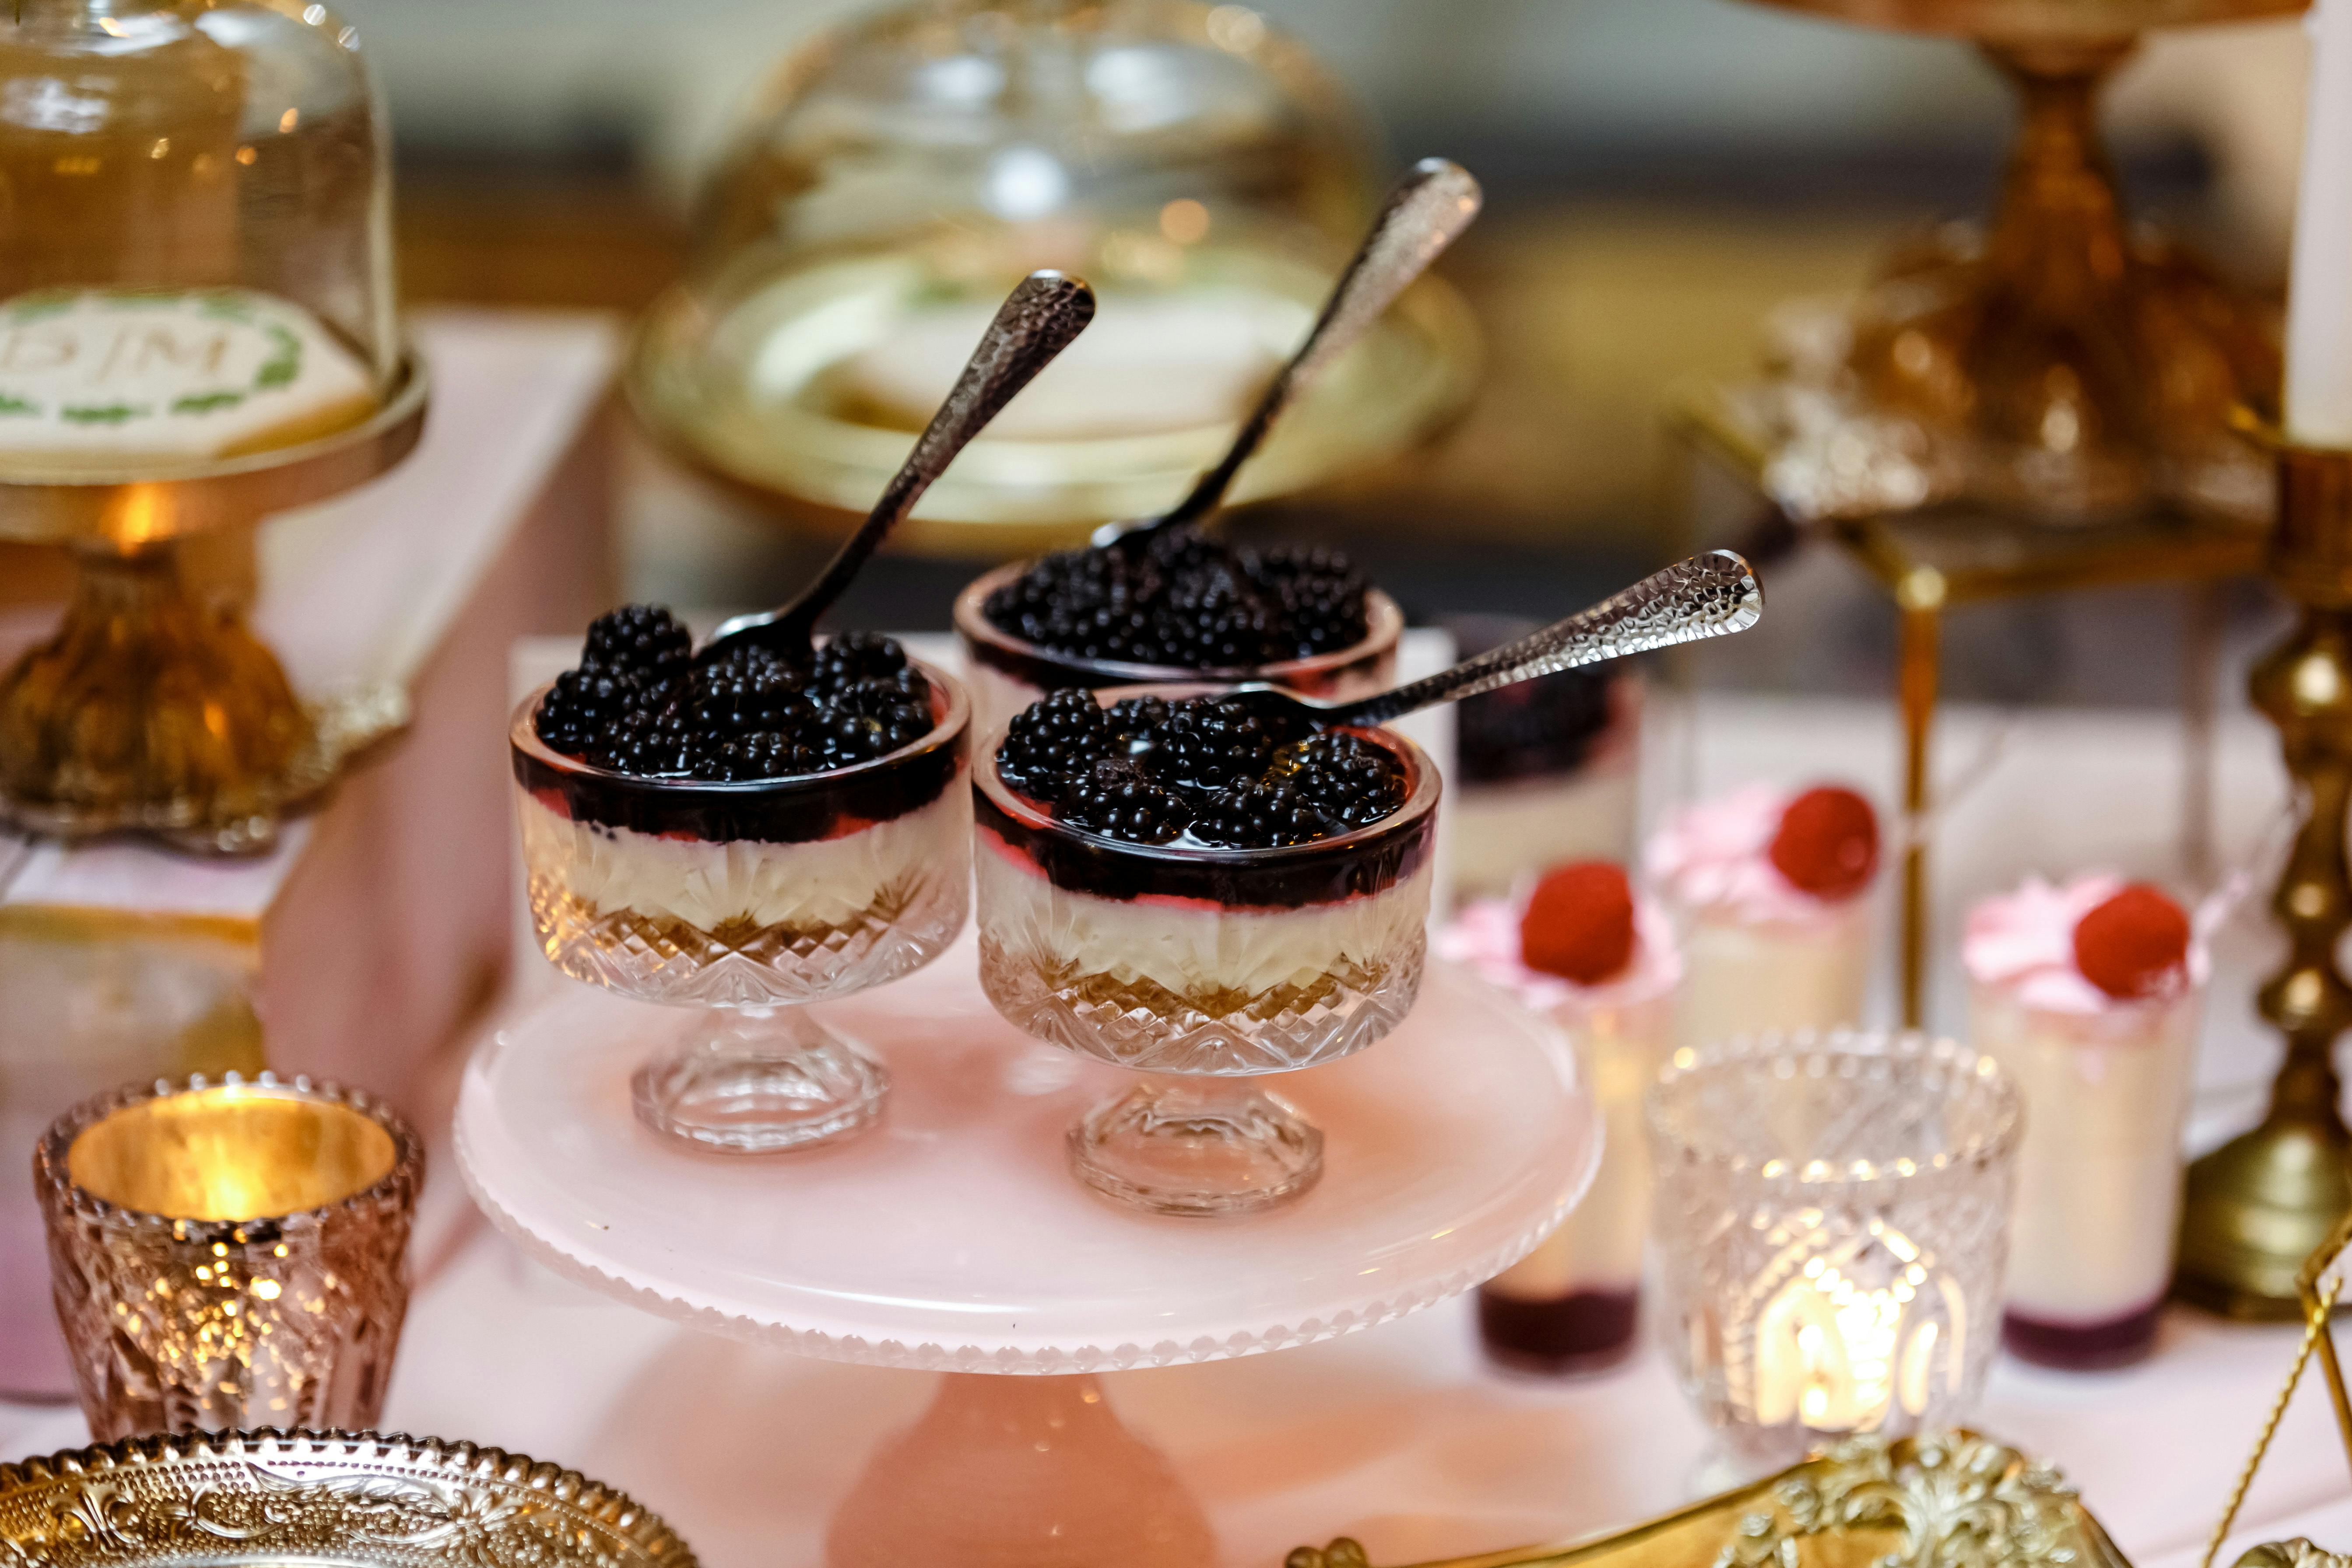 Diana & Matthew Wedding Ceremony & Reception in Chicago, IL With Sumptuous Desserts | PartySlate